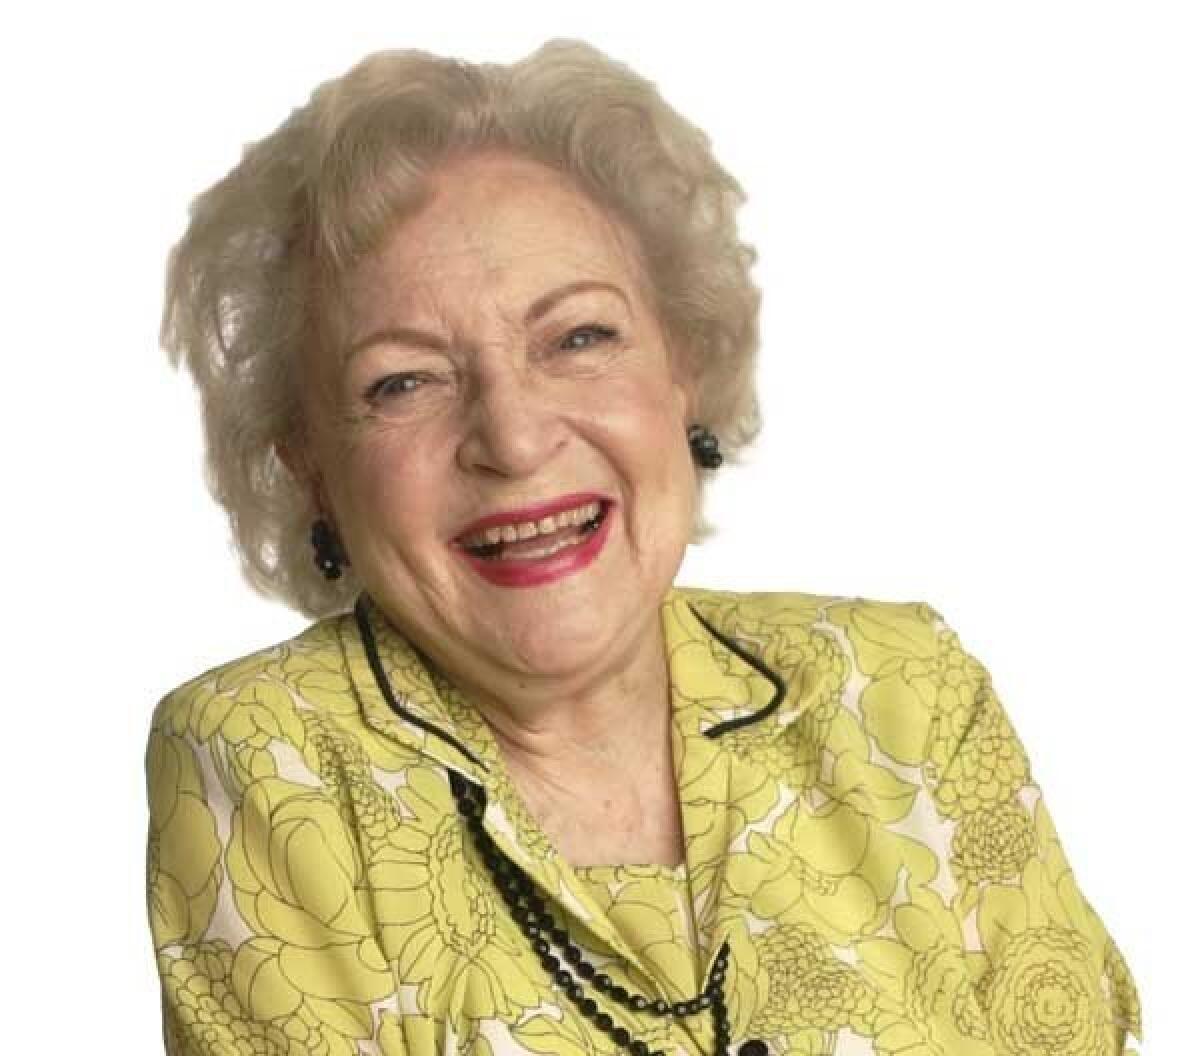 Betty White will be a guest on "The Tonight Show With Jay Leno."